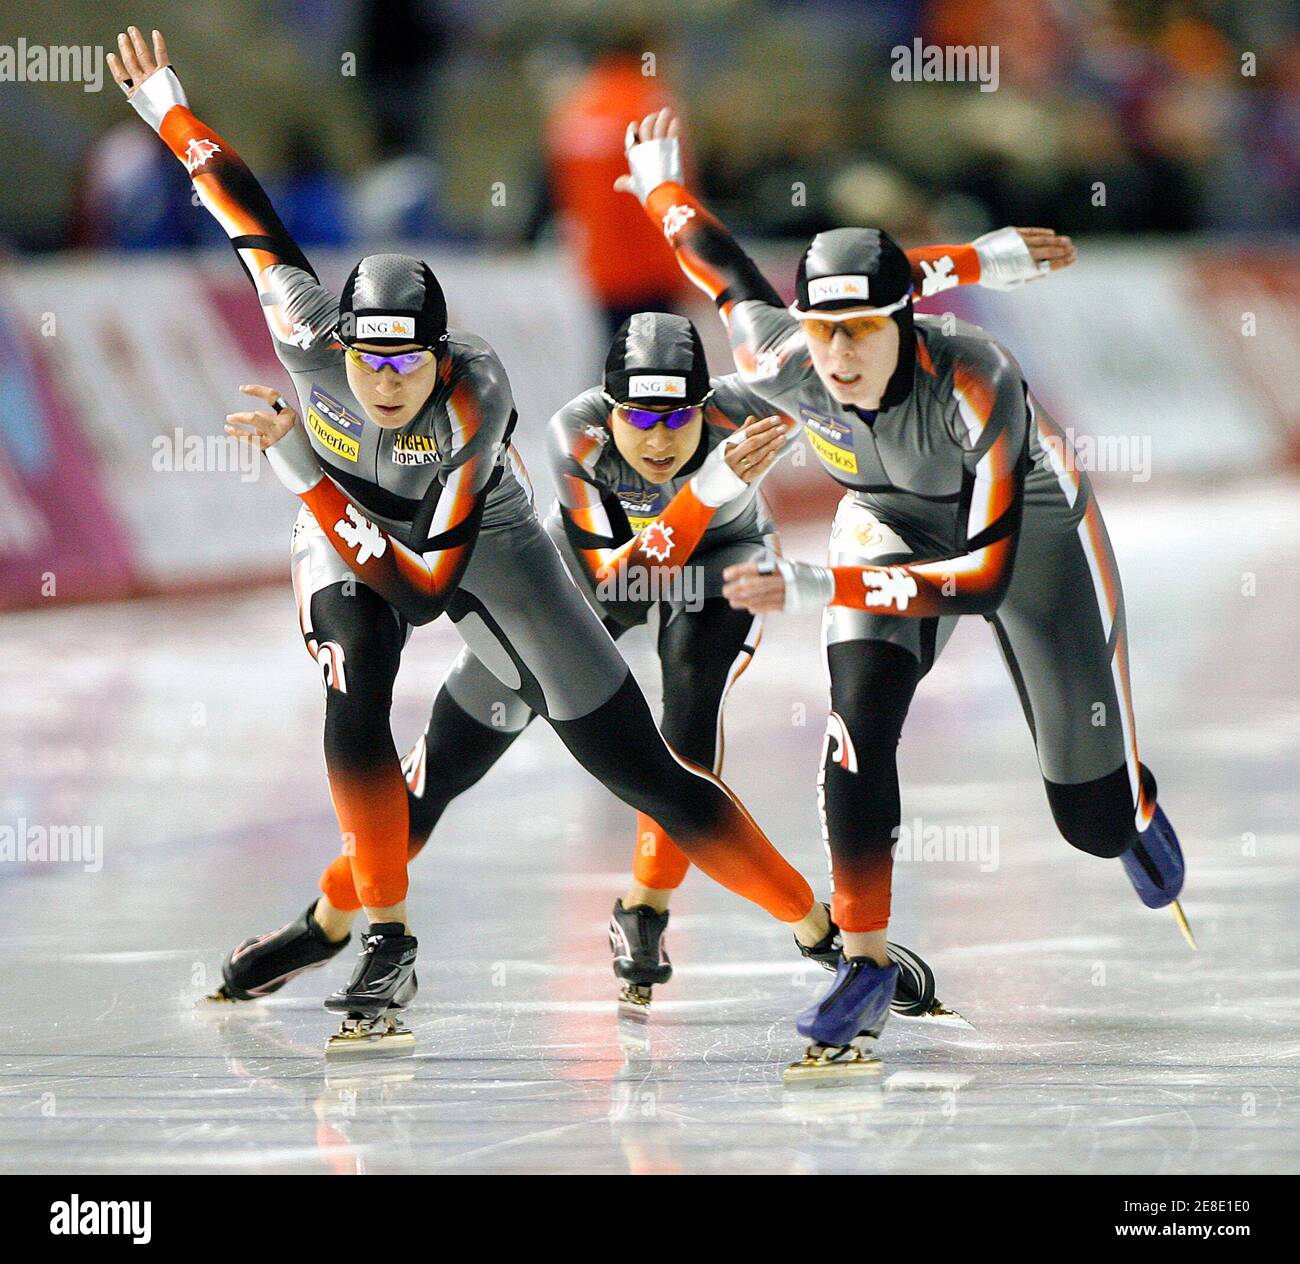 Kristina Groves (L), Shannon Rempel (C) and Christine Nesbitt of Canada skate to a second place finish in the ladies pursuit race during the 2007 ISU World Cup Speed Skating Championships at the Calgary Olympic Oval in Calgary, Alberta, November 18, 2007. REUTERS/Todd Korol (CANADA) Stock Photo